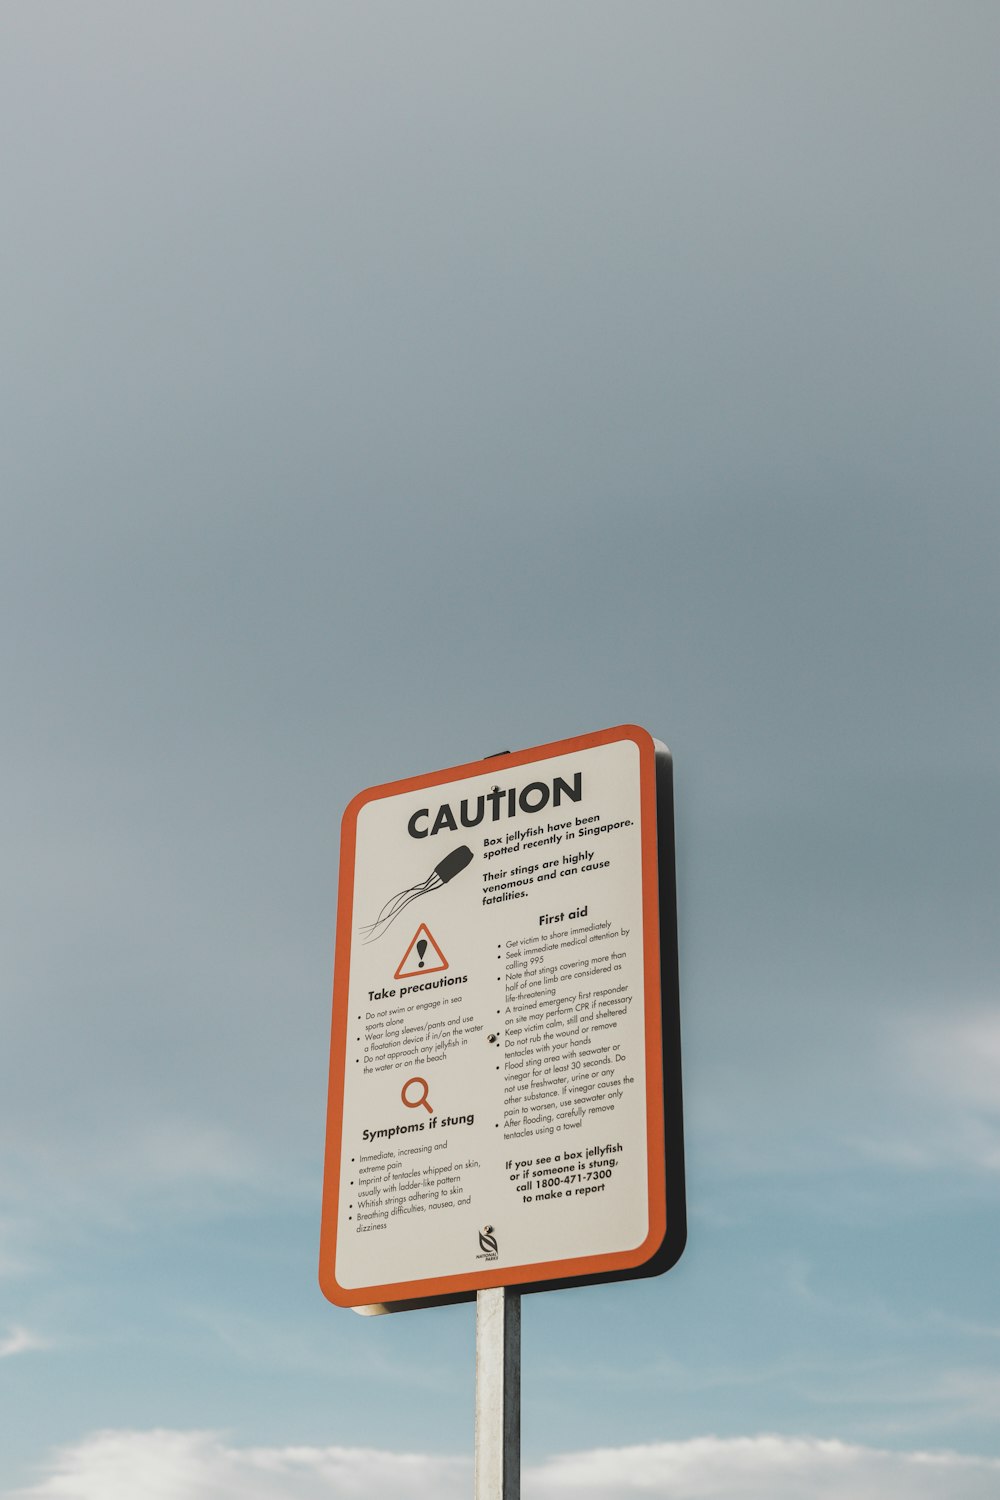 a caution sign on a pole in front of a cloudy sky